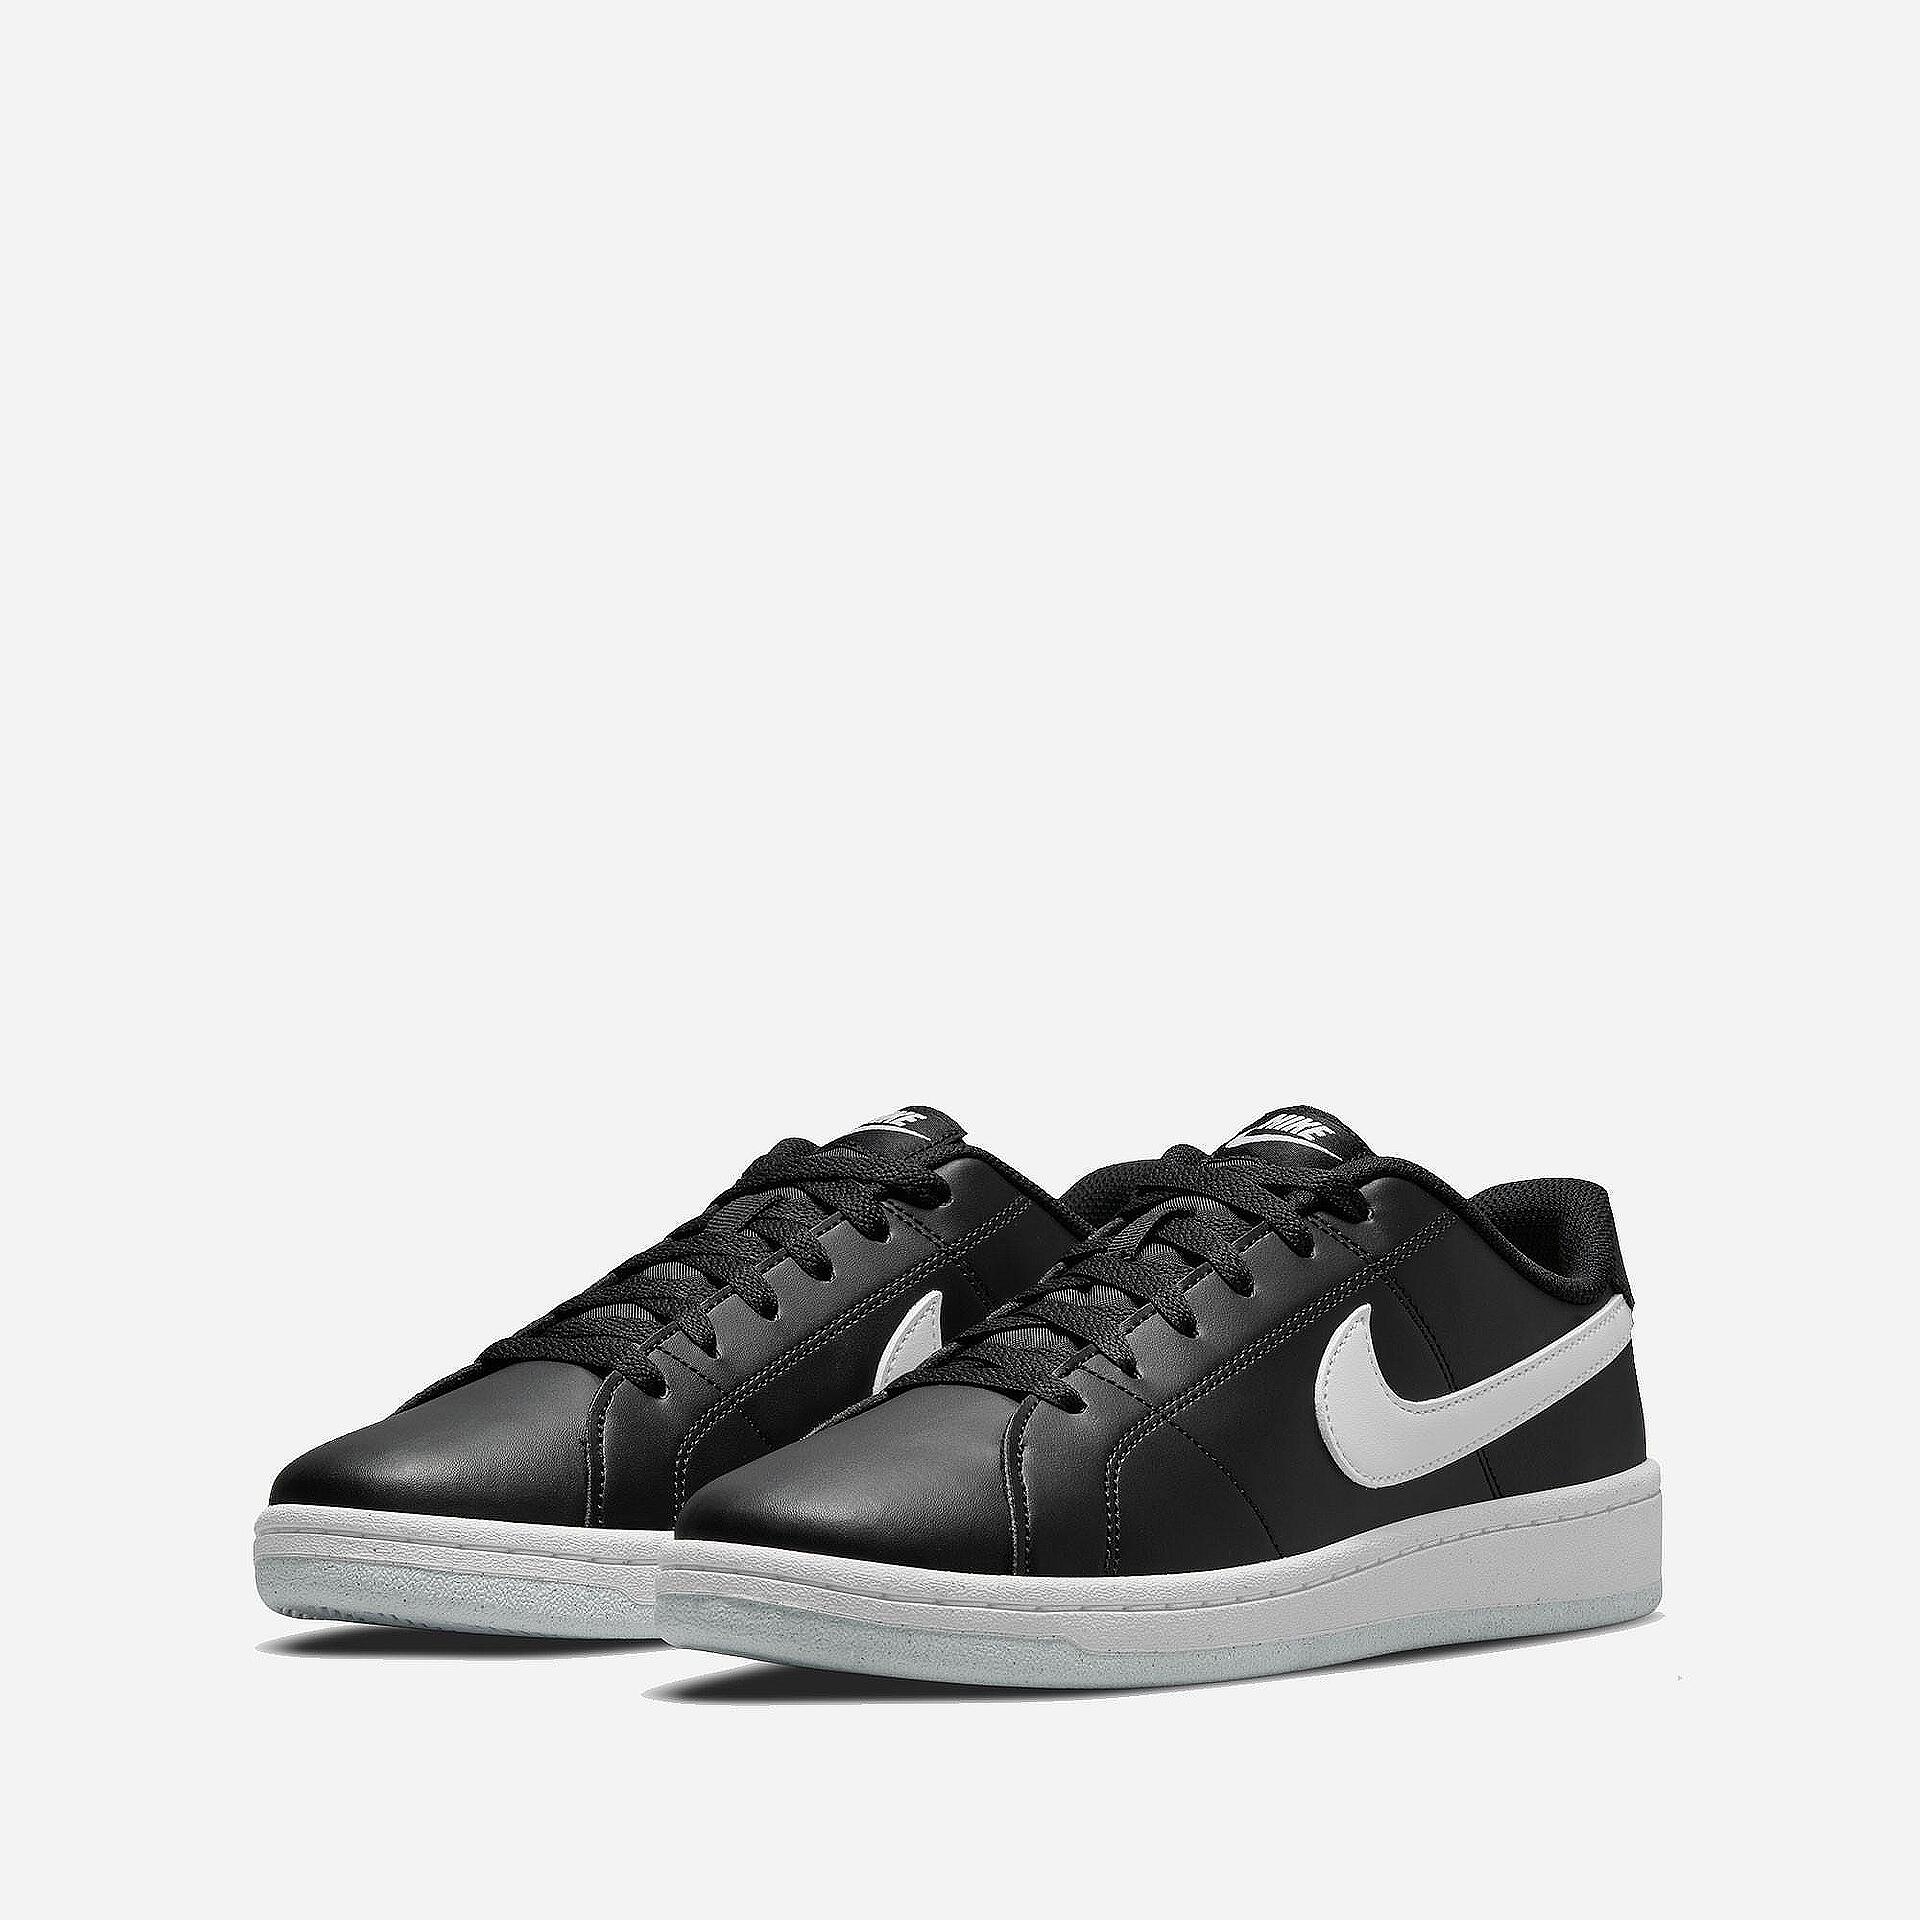 NIKE COURT ROYALE 2-DH3159-001